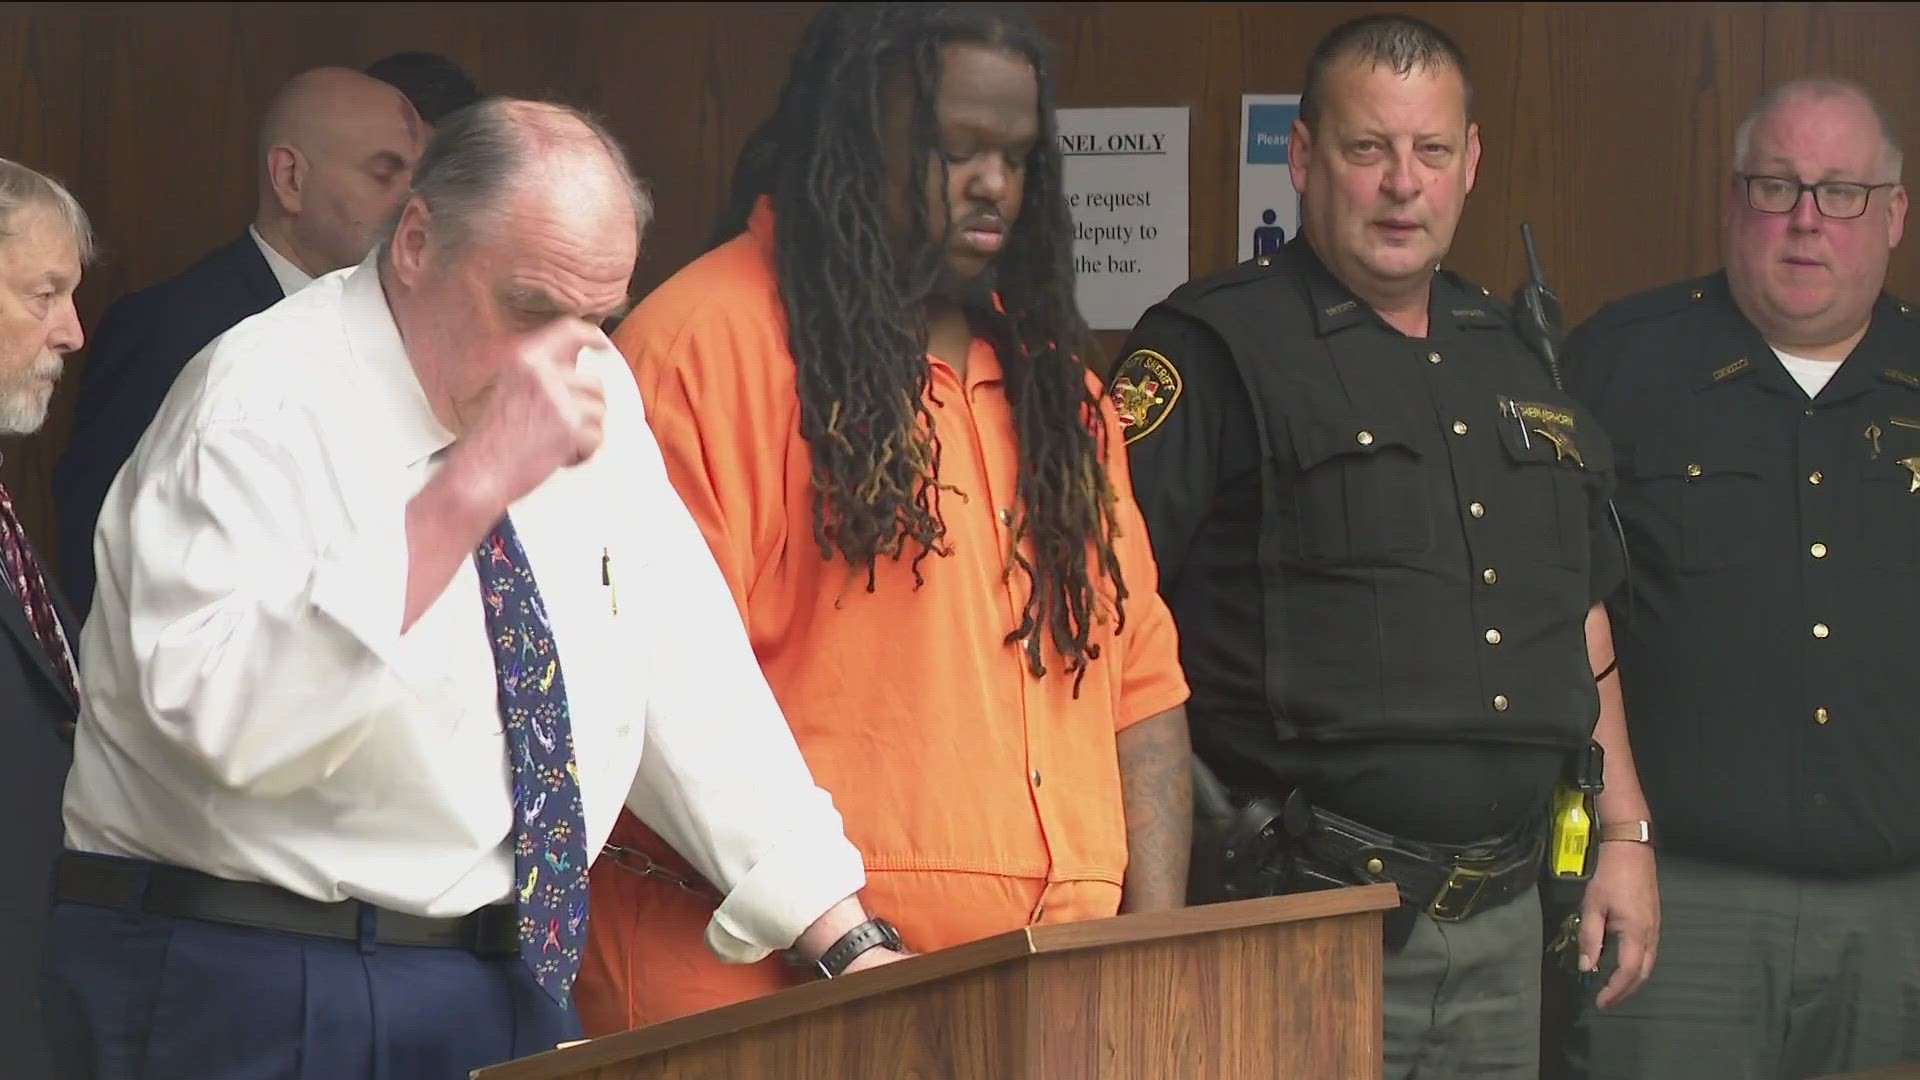 30-year-old Alton Reid appeared in court Monday. He is accused of shooting two people in their car on April 16, killing 34-year-old Levell Saunders.